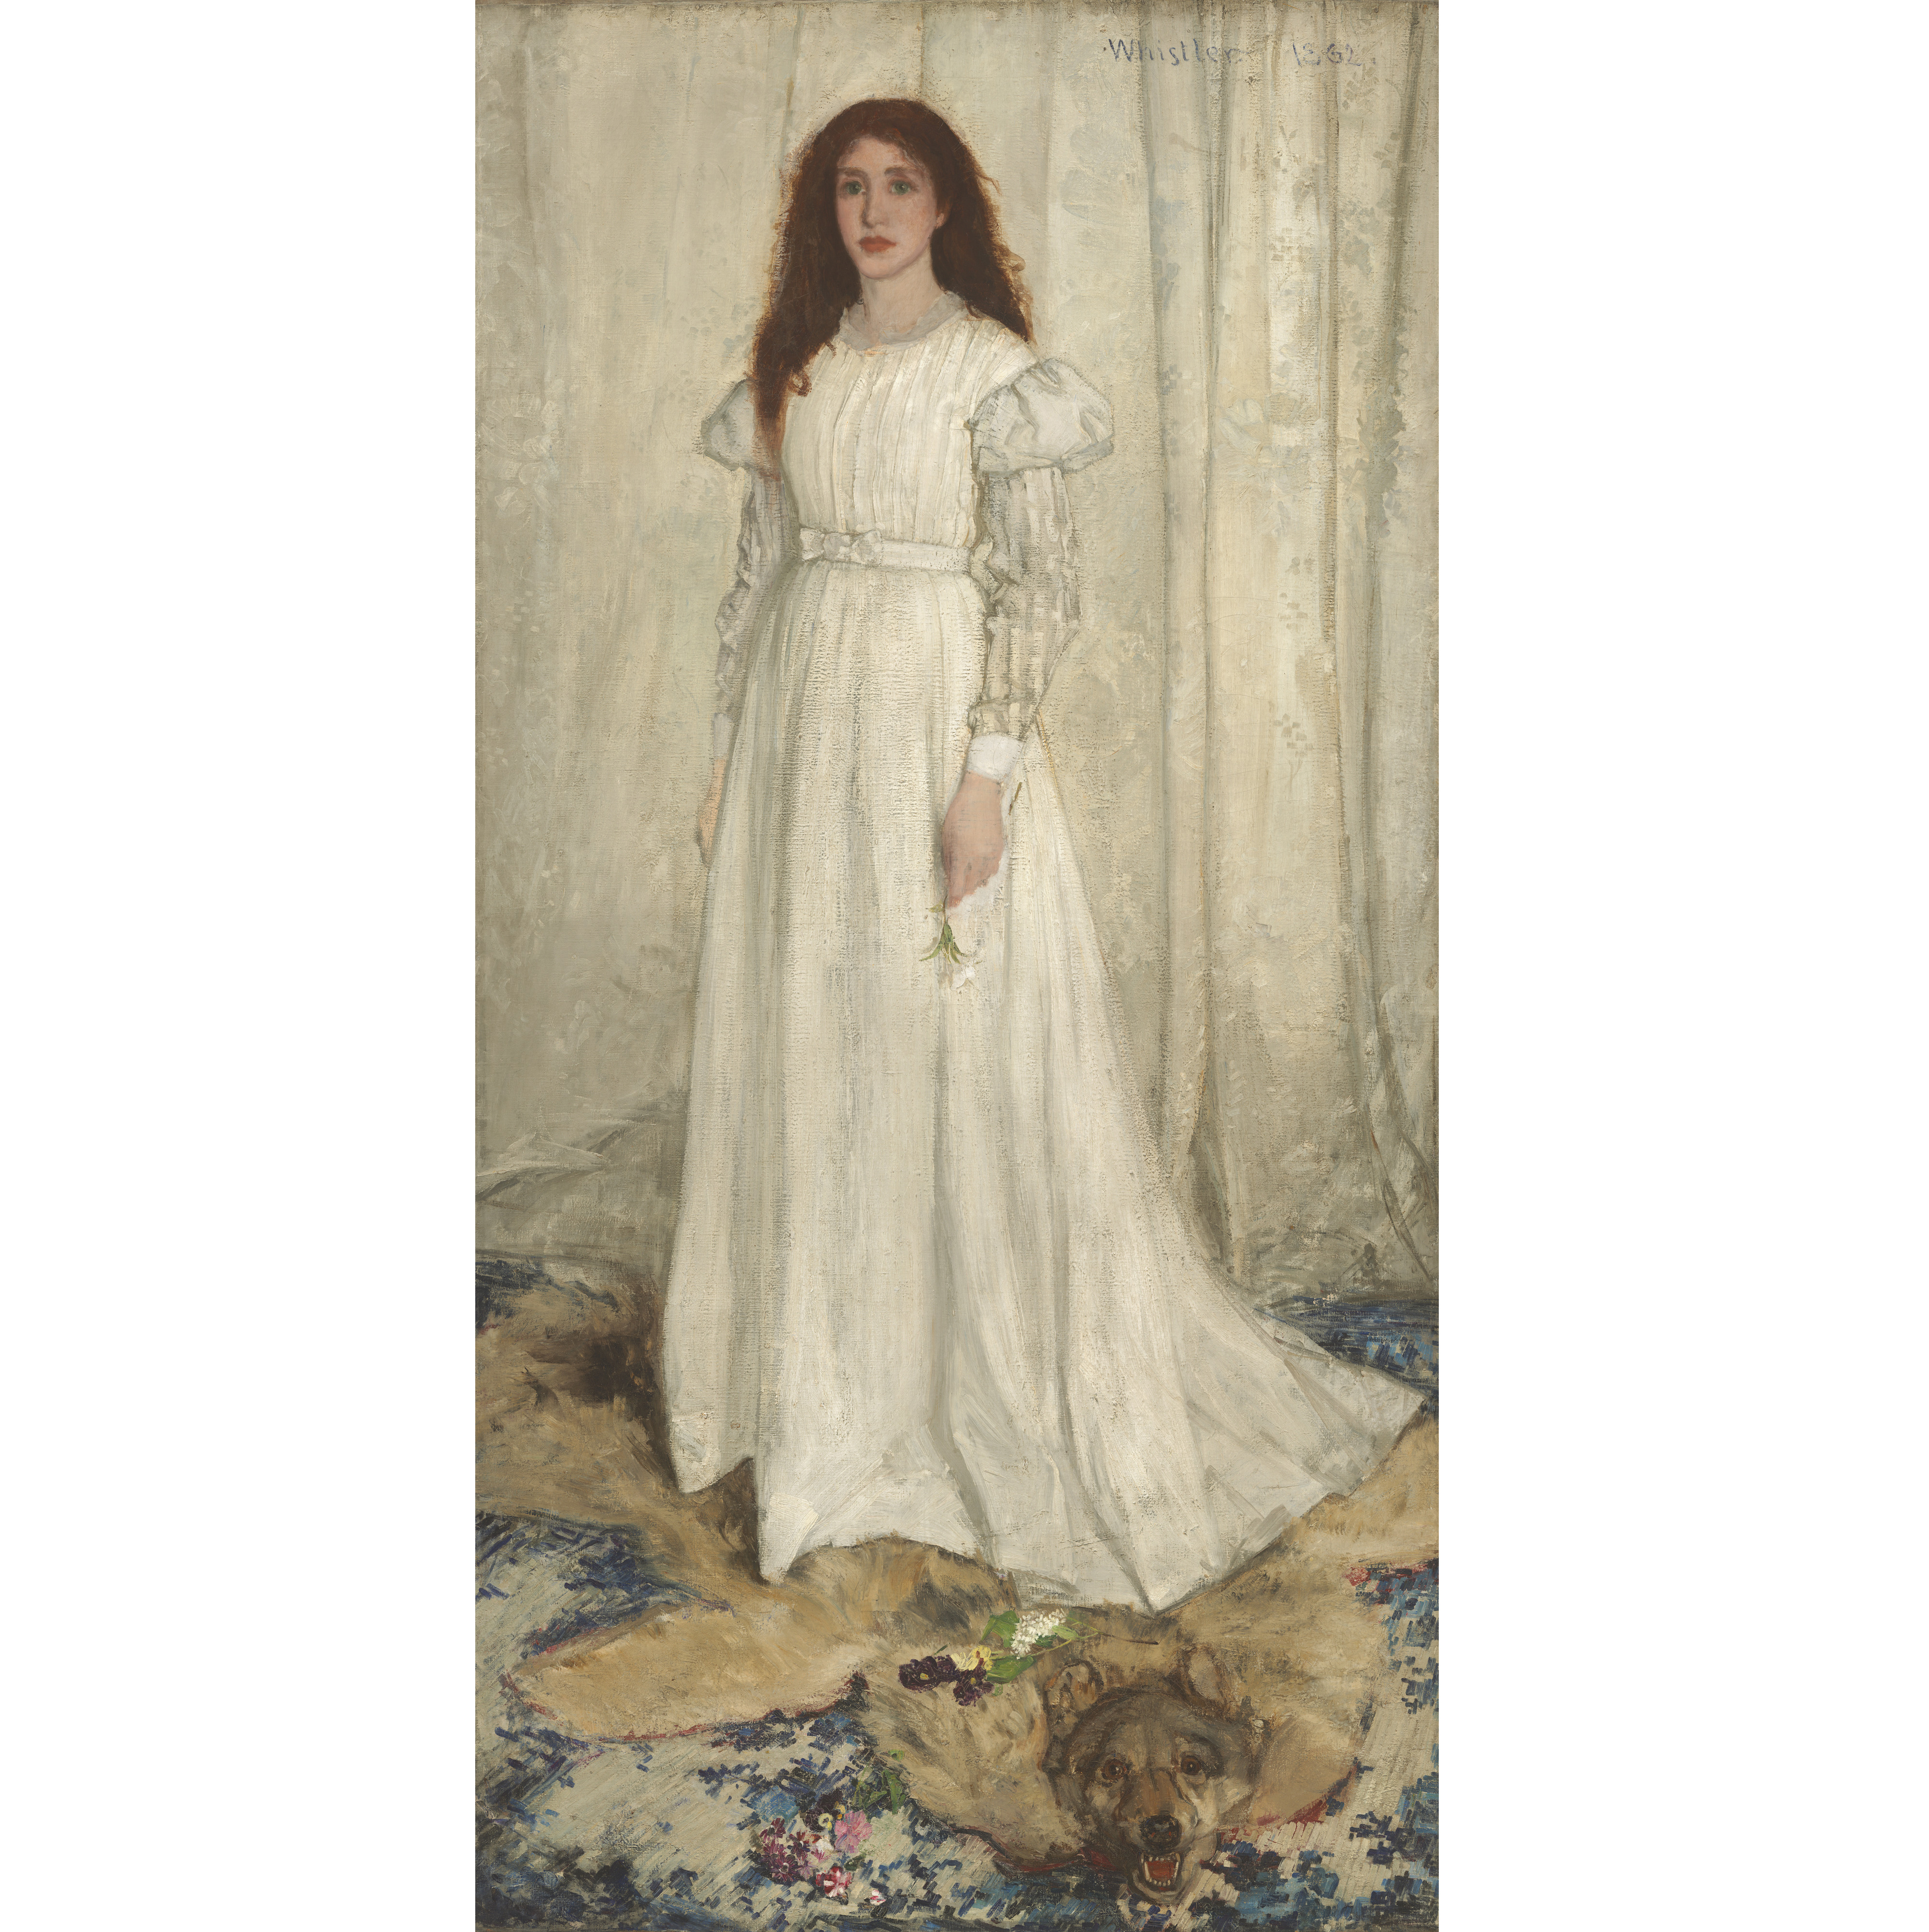  James McNeill Whistler, ‘Symphony in White, No. 1: The White Girl,’ 1861–1863, 1872. Oil on canvas. Overall: 213 by 107.9cm (83 7/8 by 42 1/2in), framed: 244.2 by 136.5 by 8.3cm (96 1/8 by 53 3/4 x 3 1/4in). National Gallery of Art, Washington, Harris Whittemore Collection 